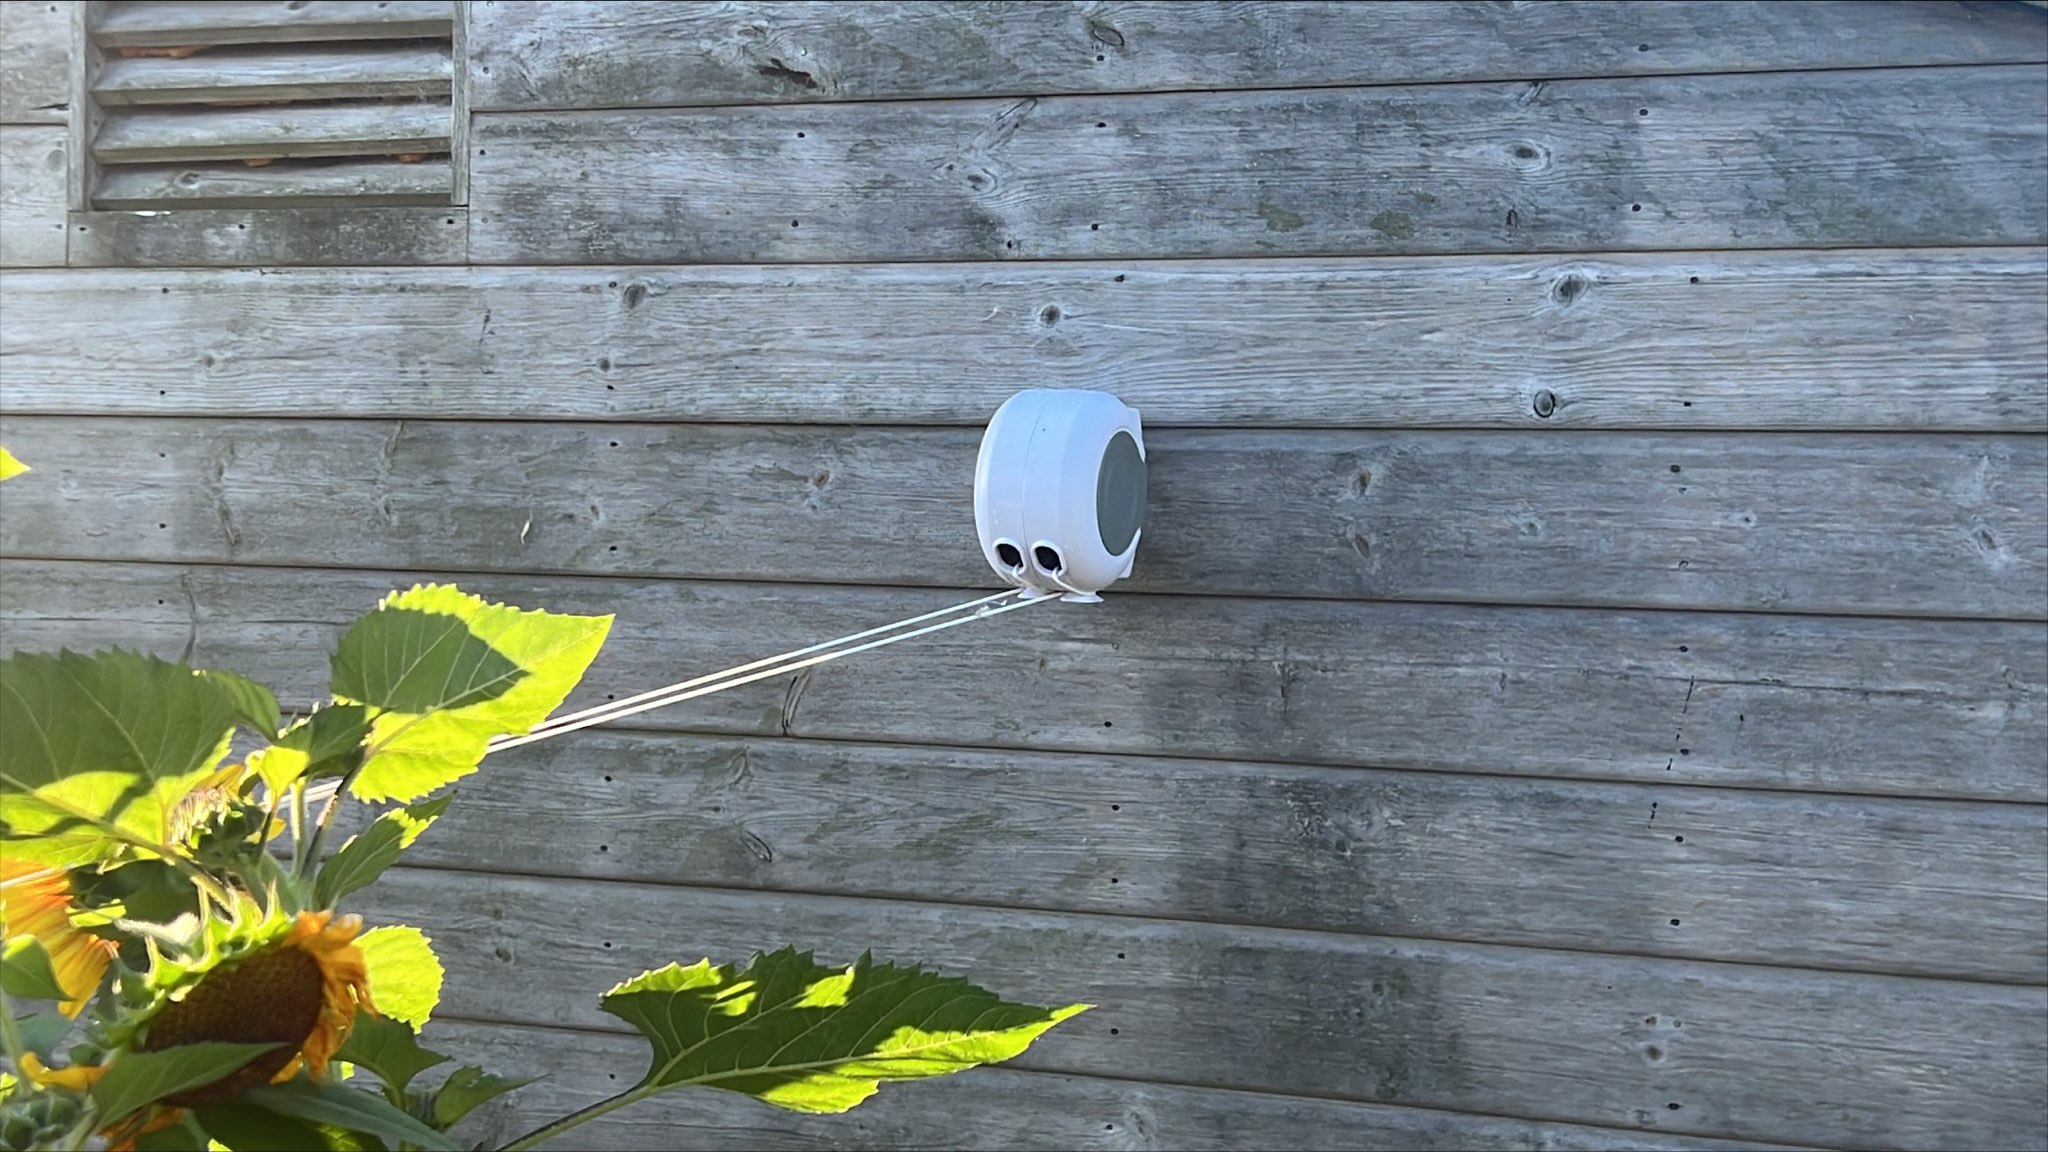 UK's Best retractable washing line that are heavy duty and